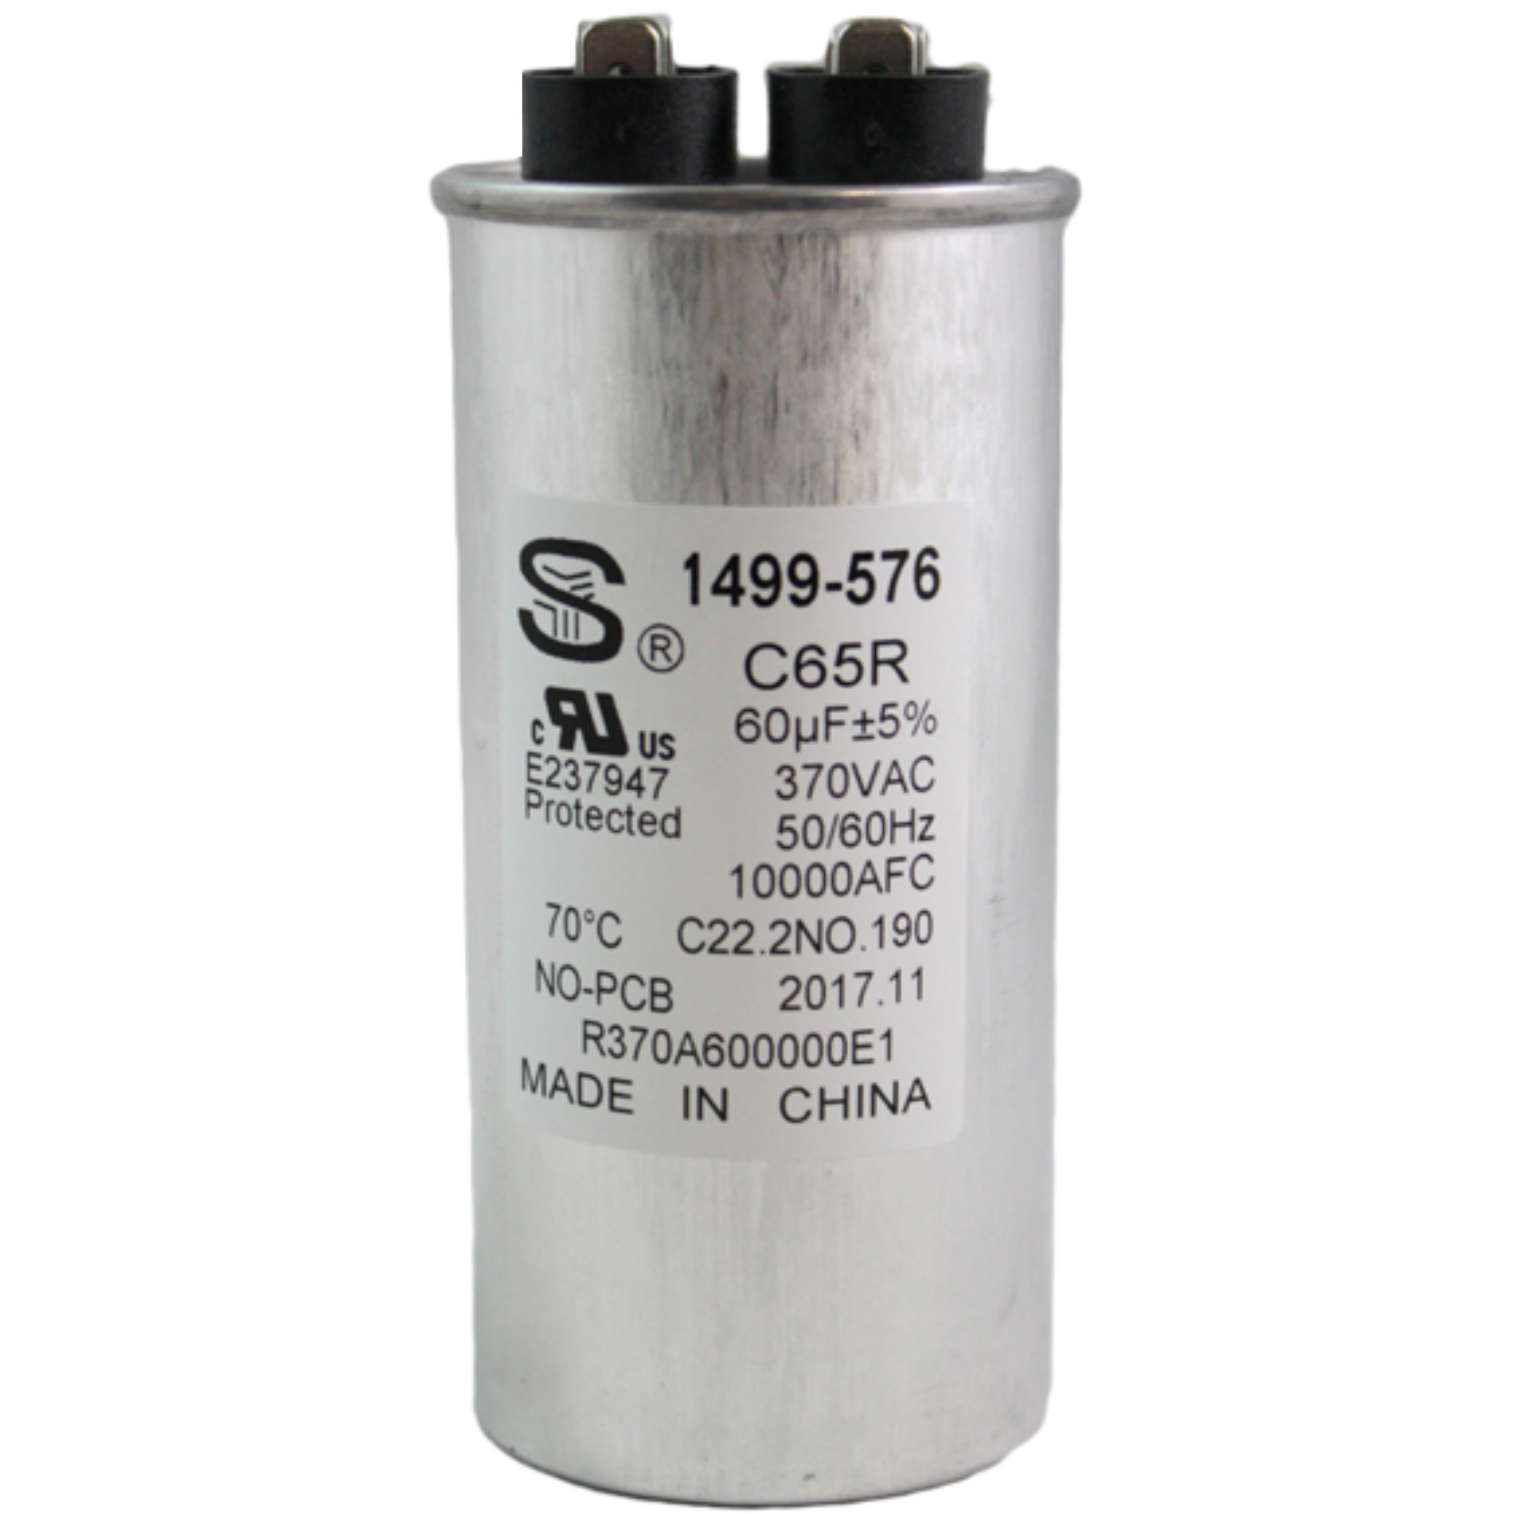 Coleman Mach 1499-5761 Replacement RV Air Conditioner Run Capacitor